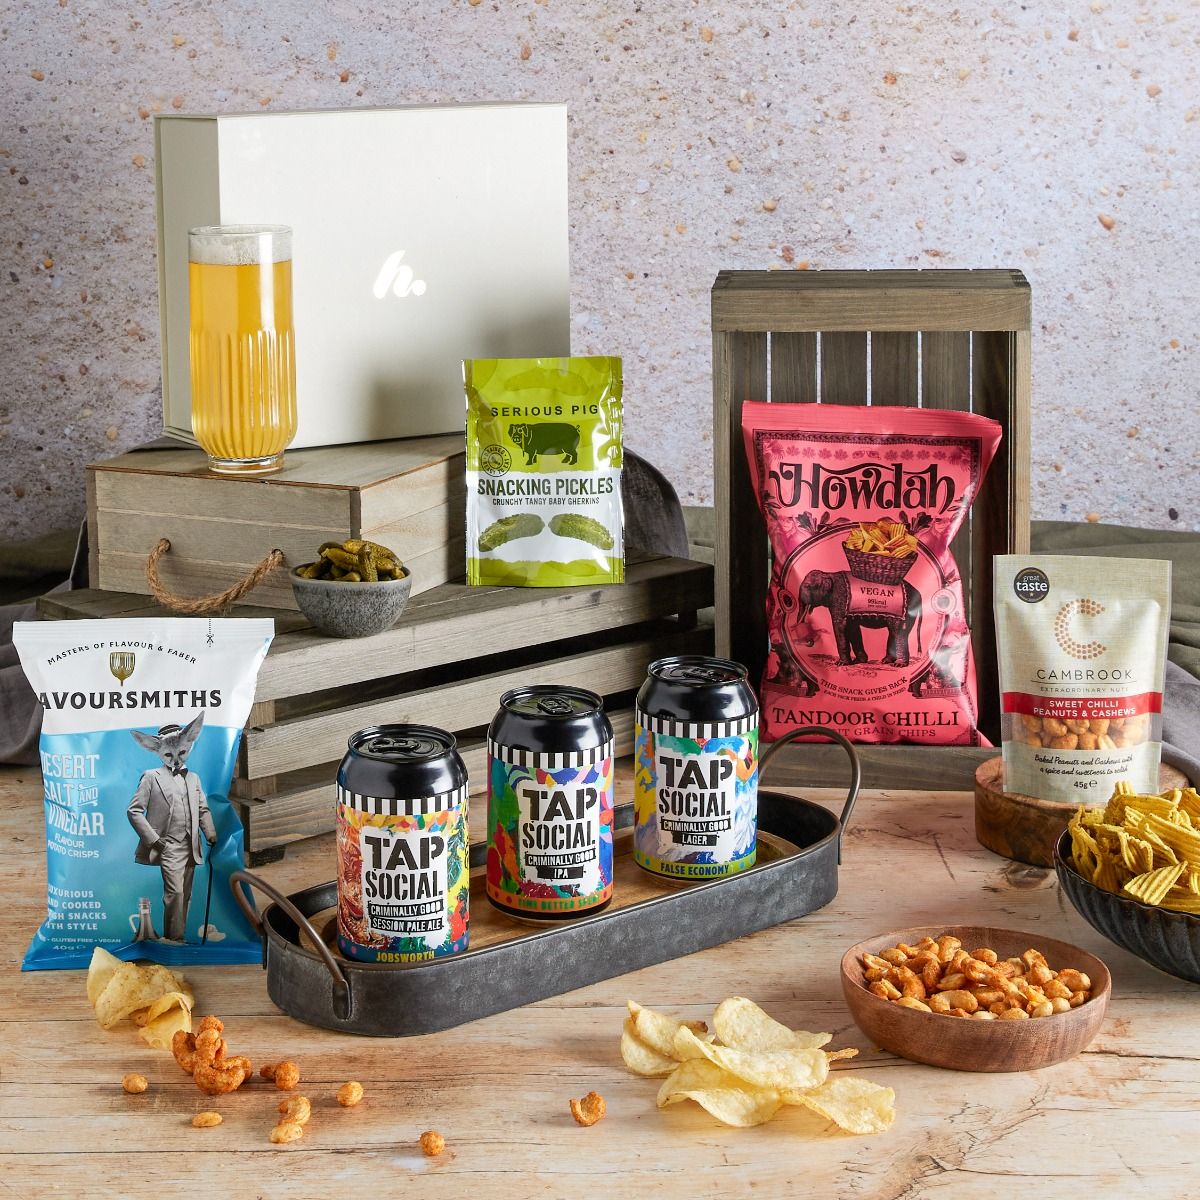 Craft beer hamper with contents on display - as a 30th birthday gift idea suggestion